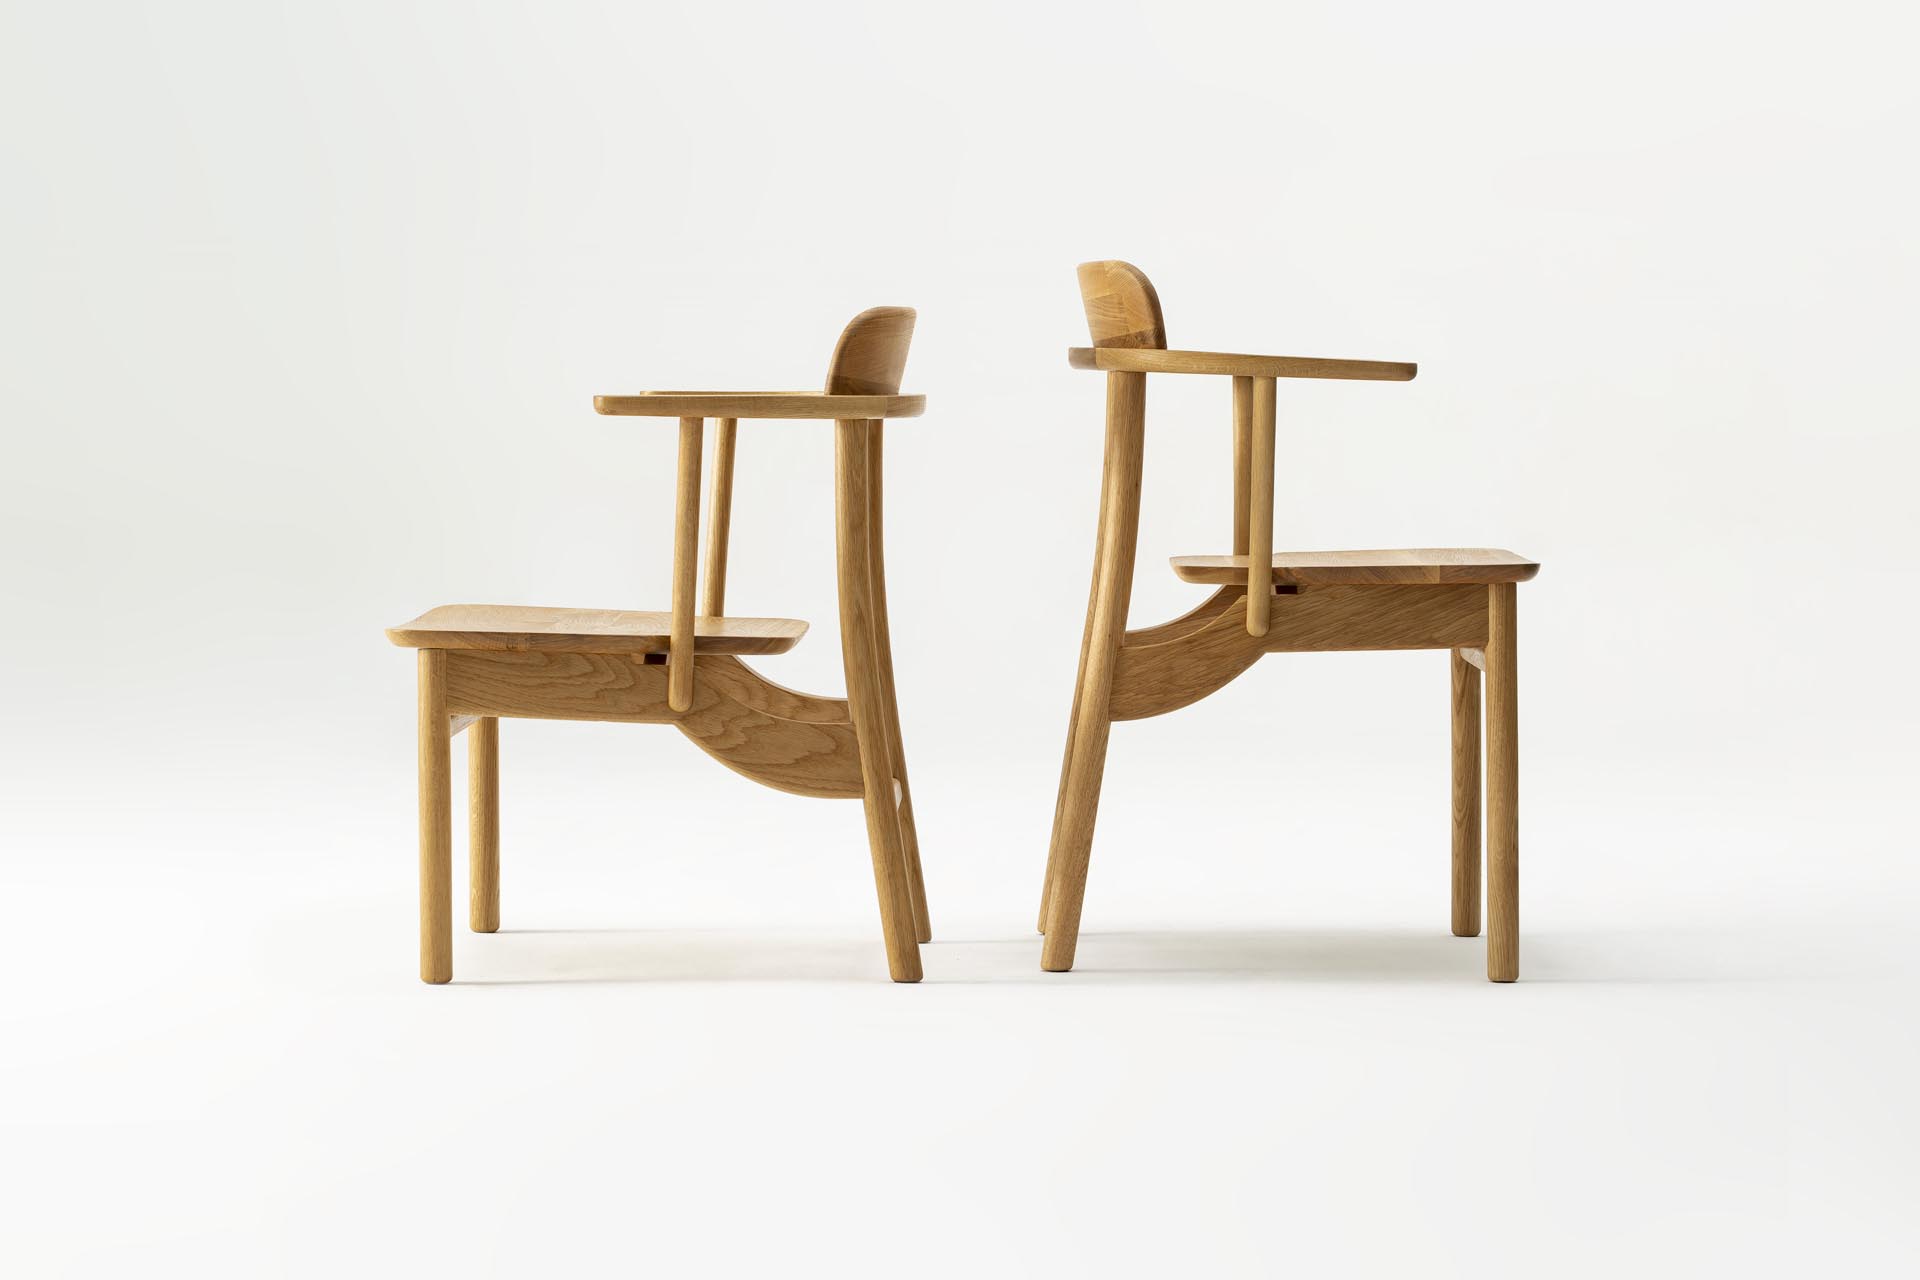 MUSE Design Winners - Crown Chairs